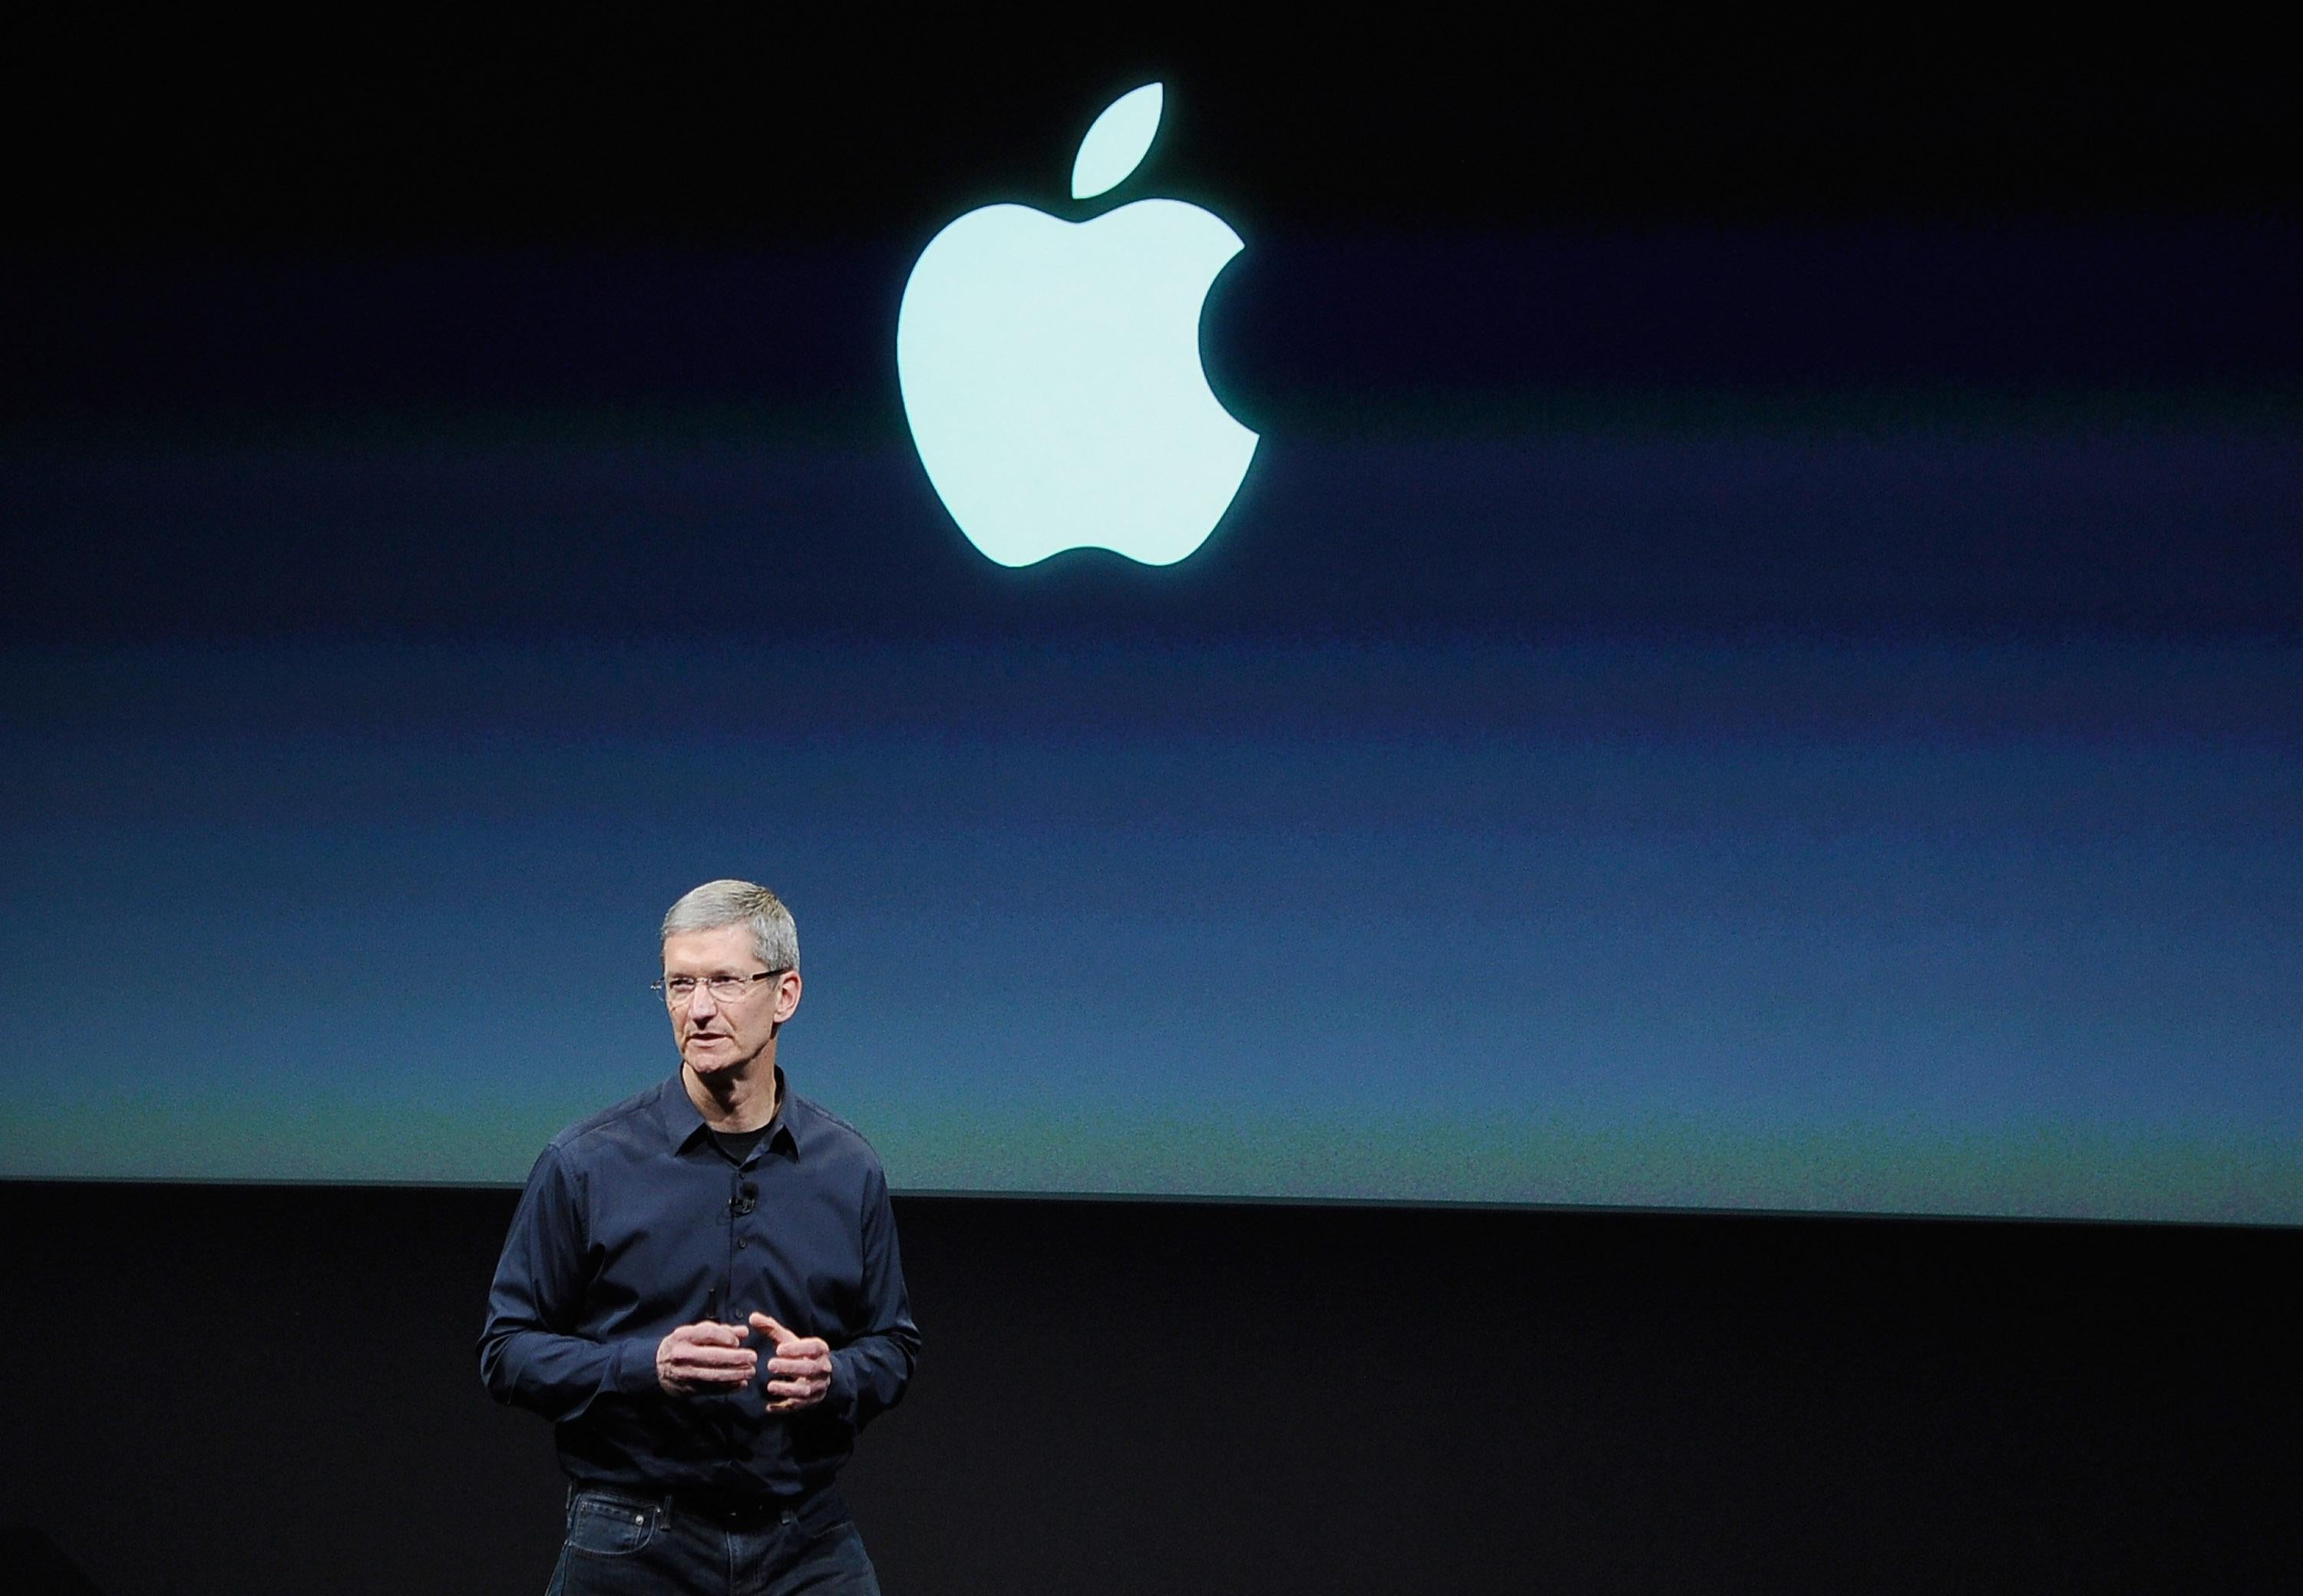 Apple CEO Tim Cook speaks at the event introducing the new iPhone.